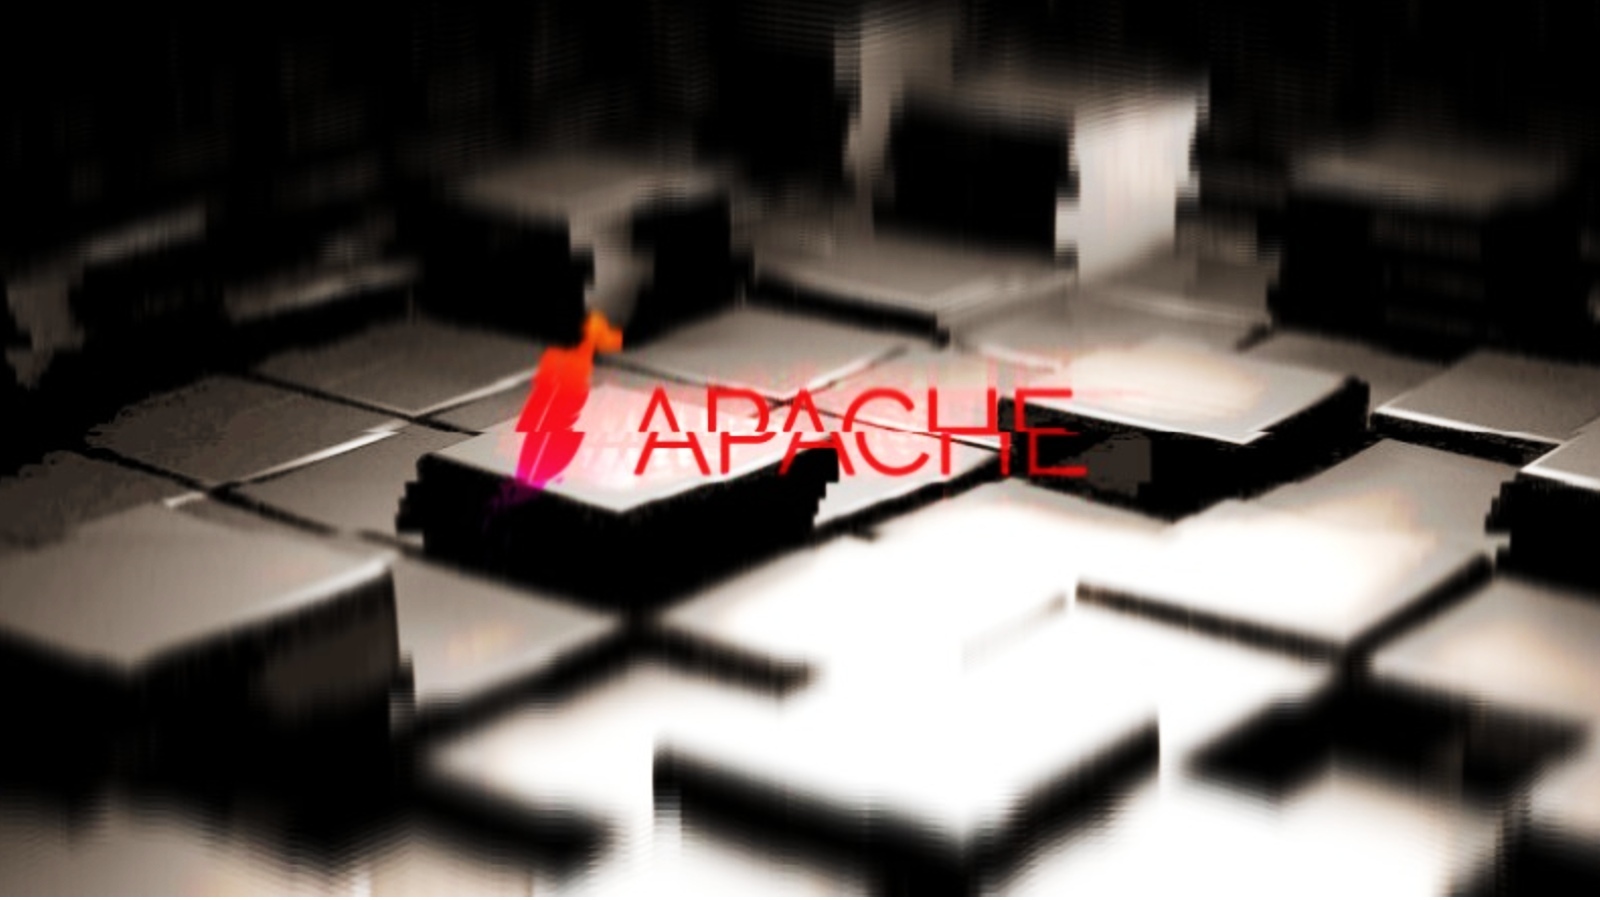 Apache fixes actively exploited zero-day vulnerability, patch now